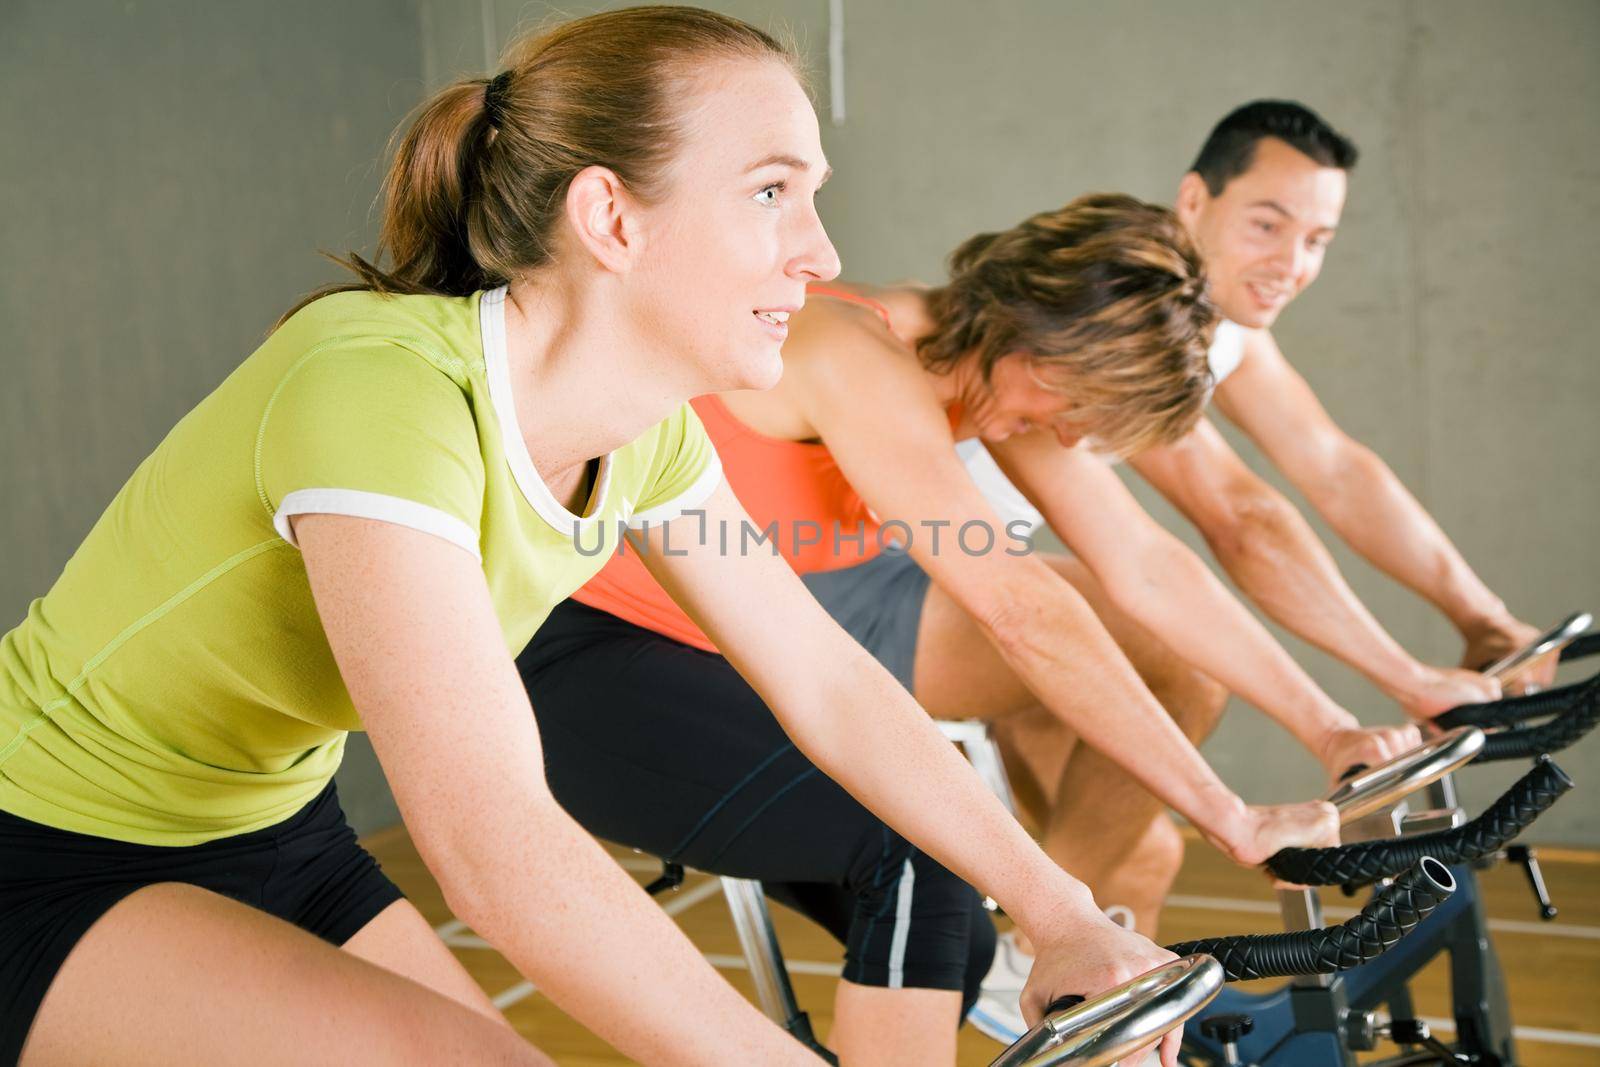 Three people cycling in a gym or fitness club, dressed in colorful clothes; focus on the girl in green in front